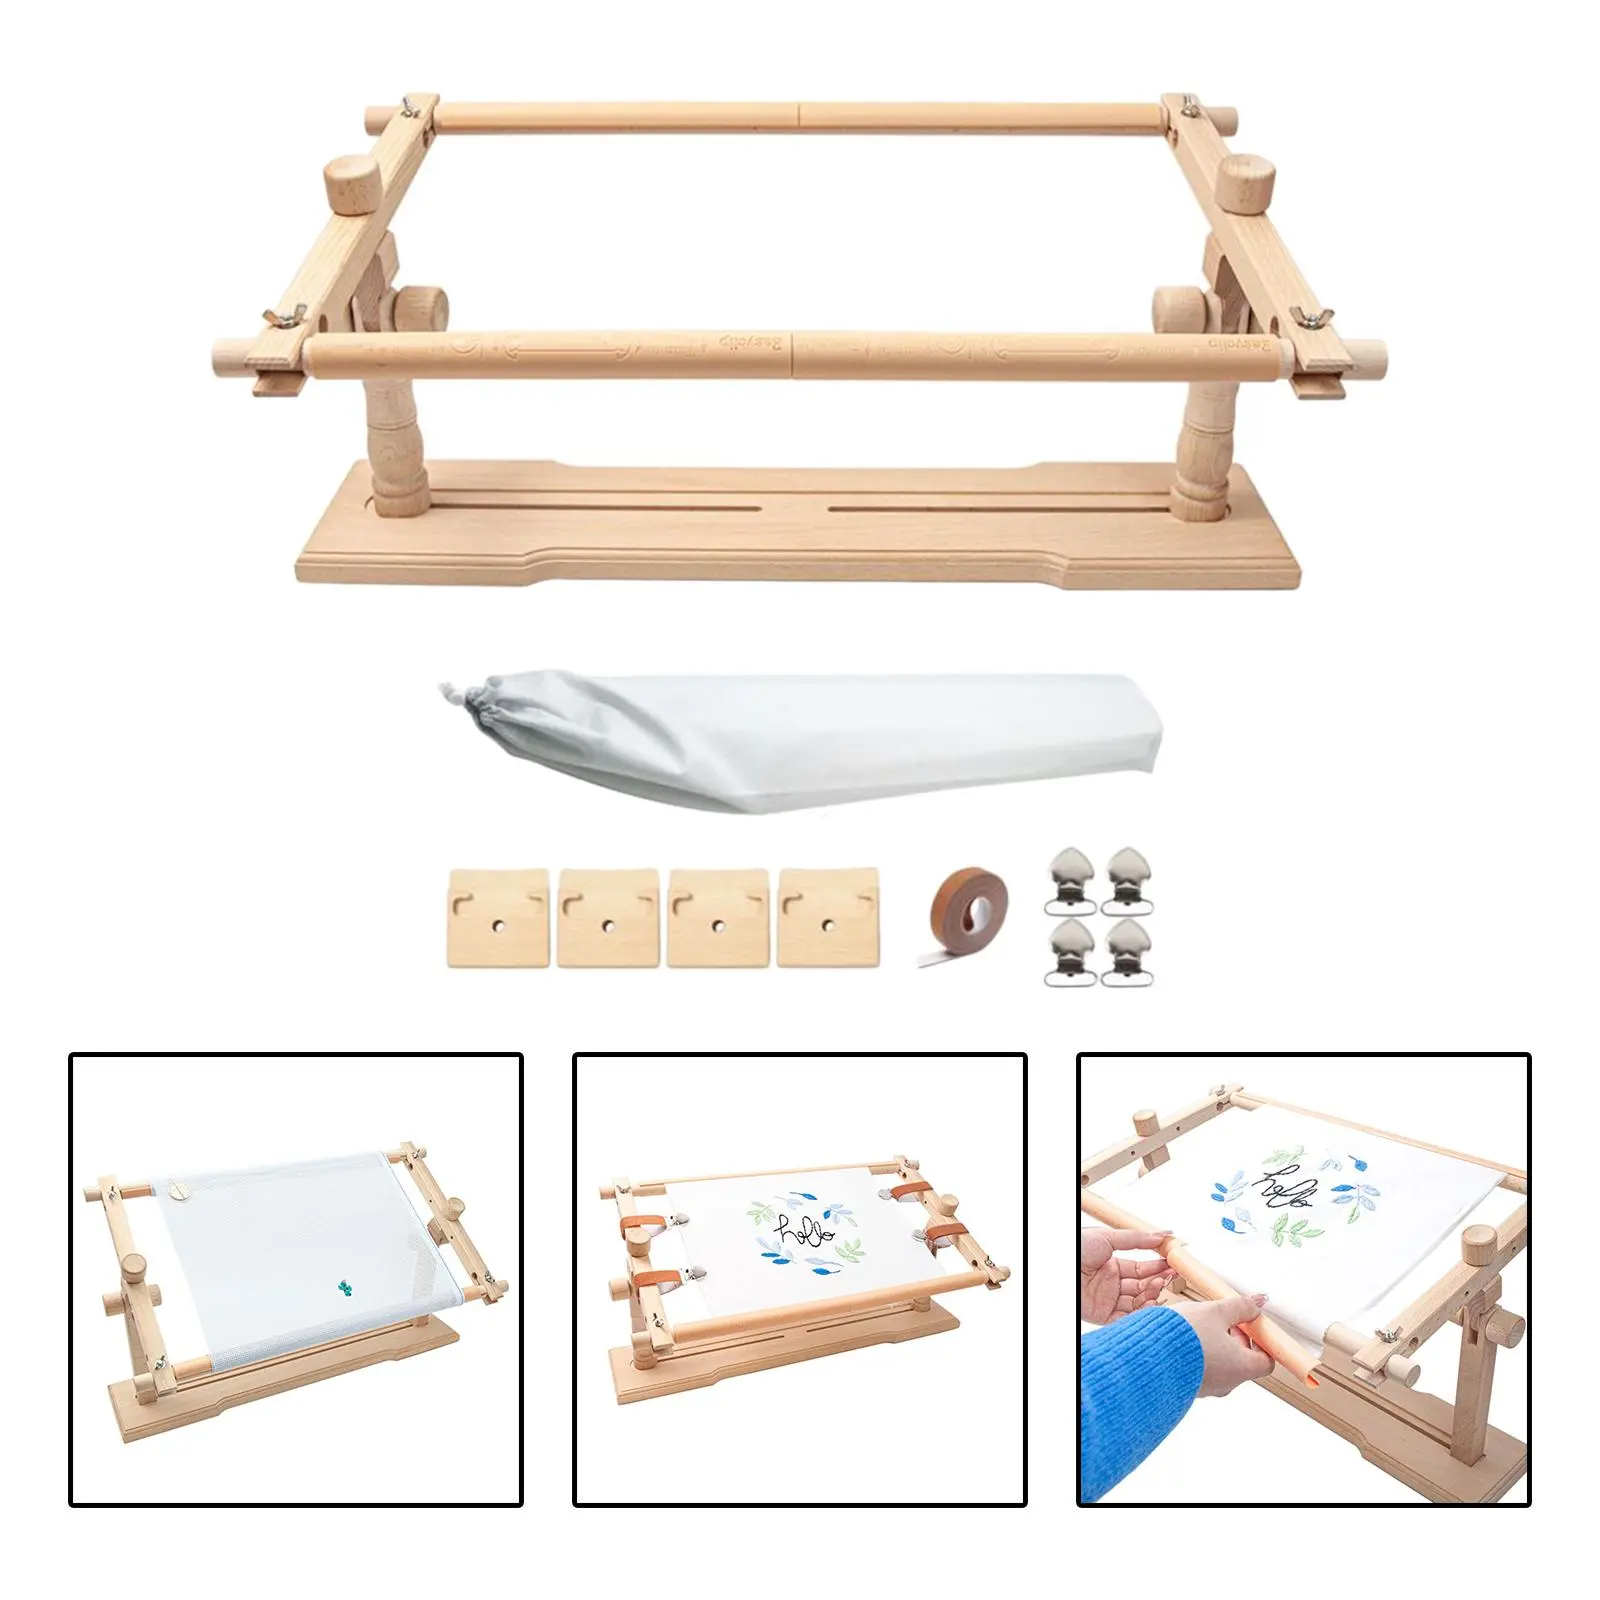 Embroidery Frame Set Plastic Cross Stitch Accessories Craft Sewing Tools  Handhold Frame Hoop Sewing Craft DIY Clips Masking Tape